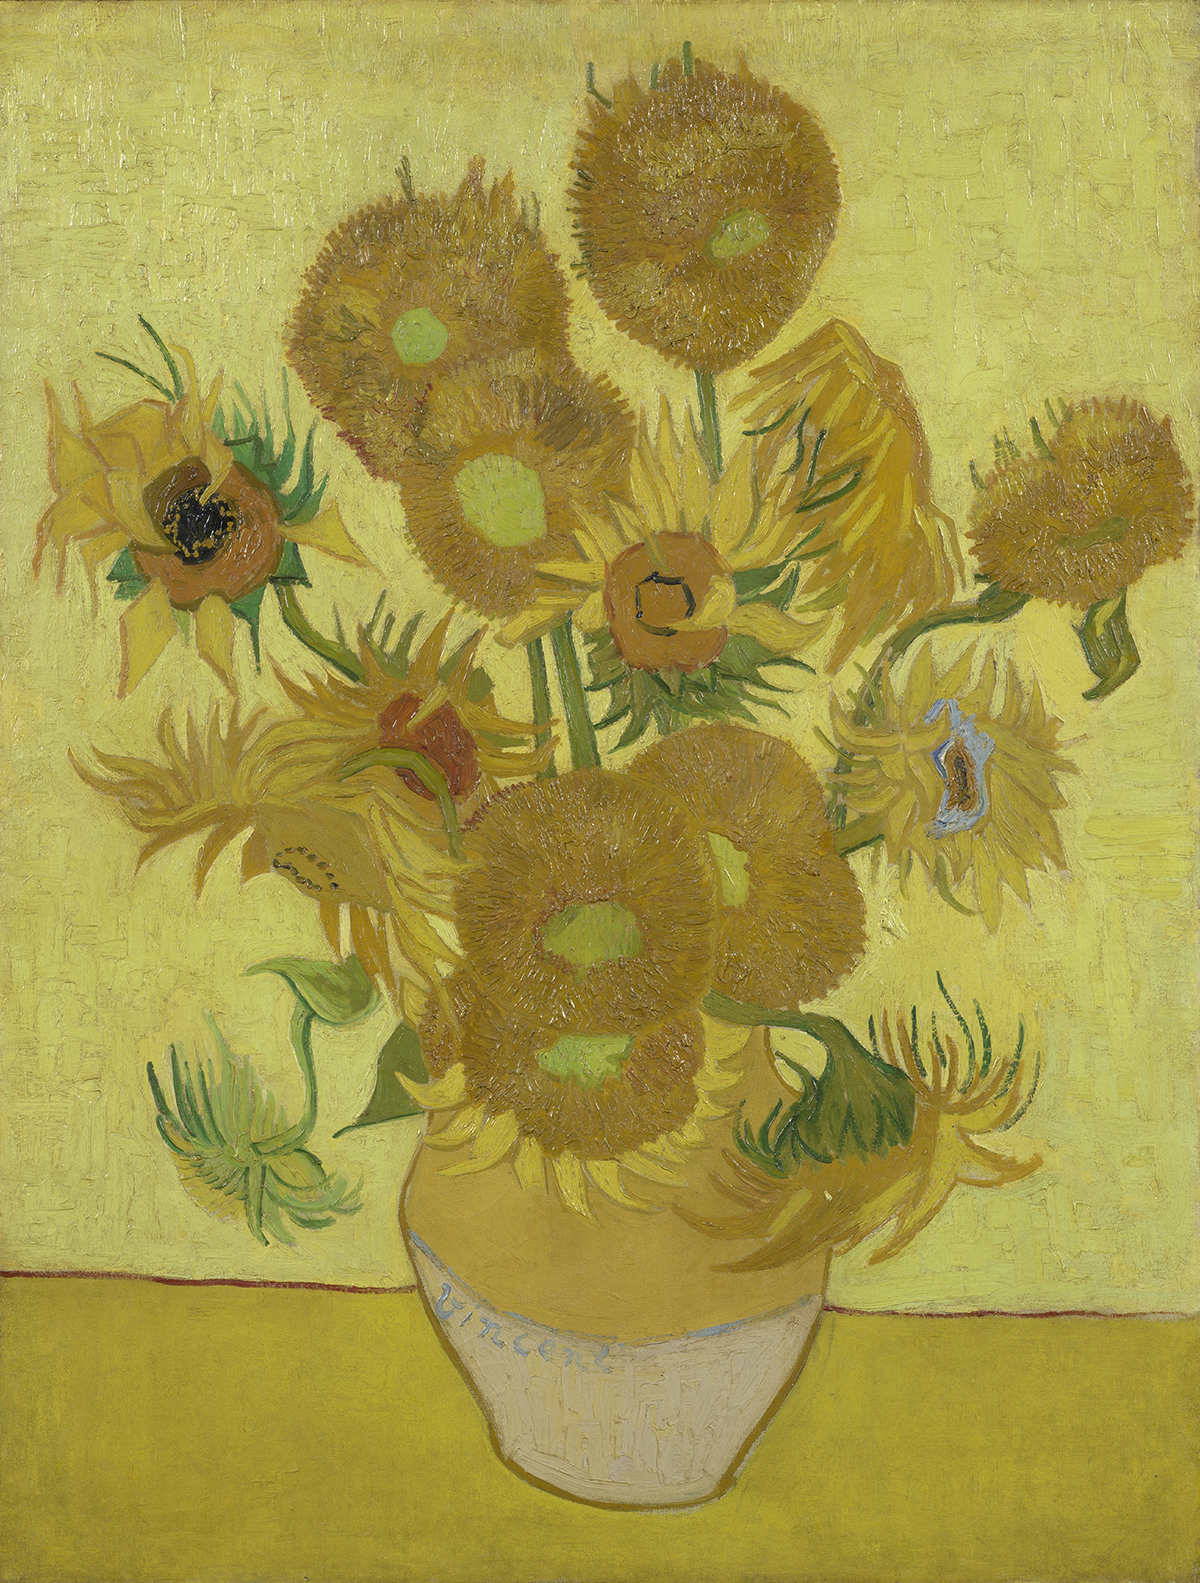 Sunflower painting by Vincent van Gogh